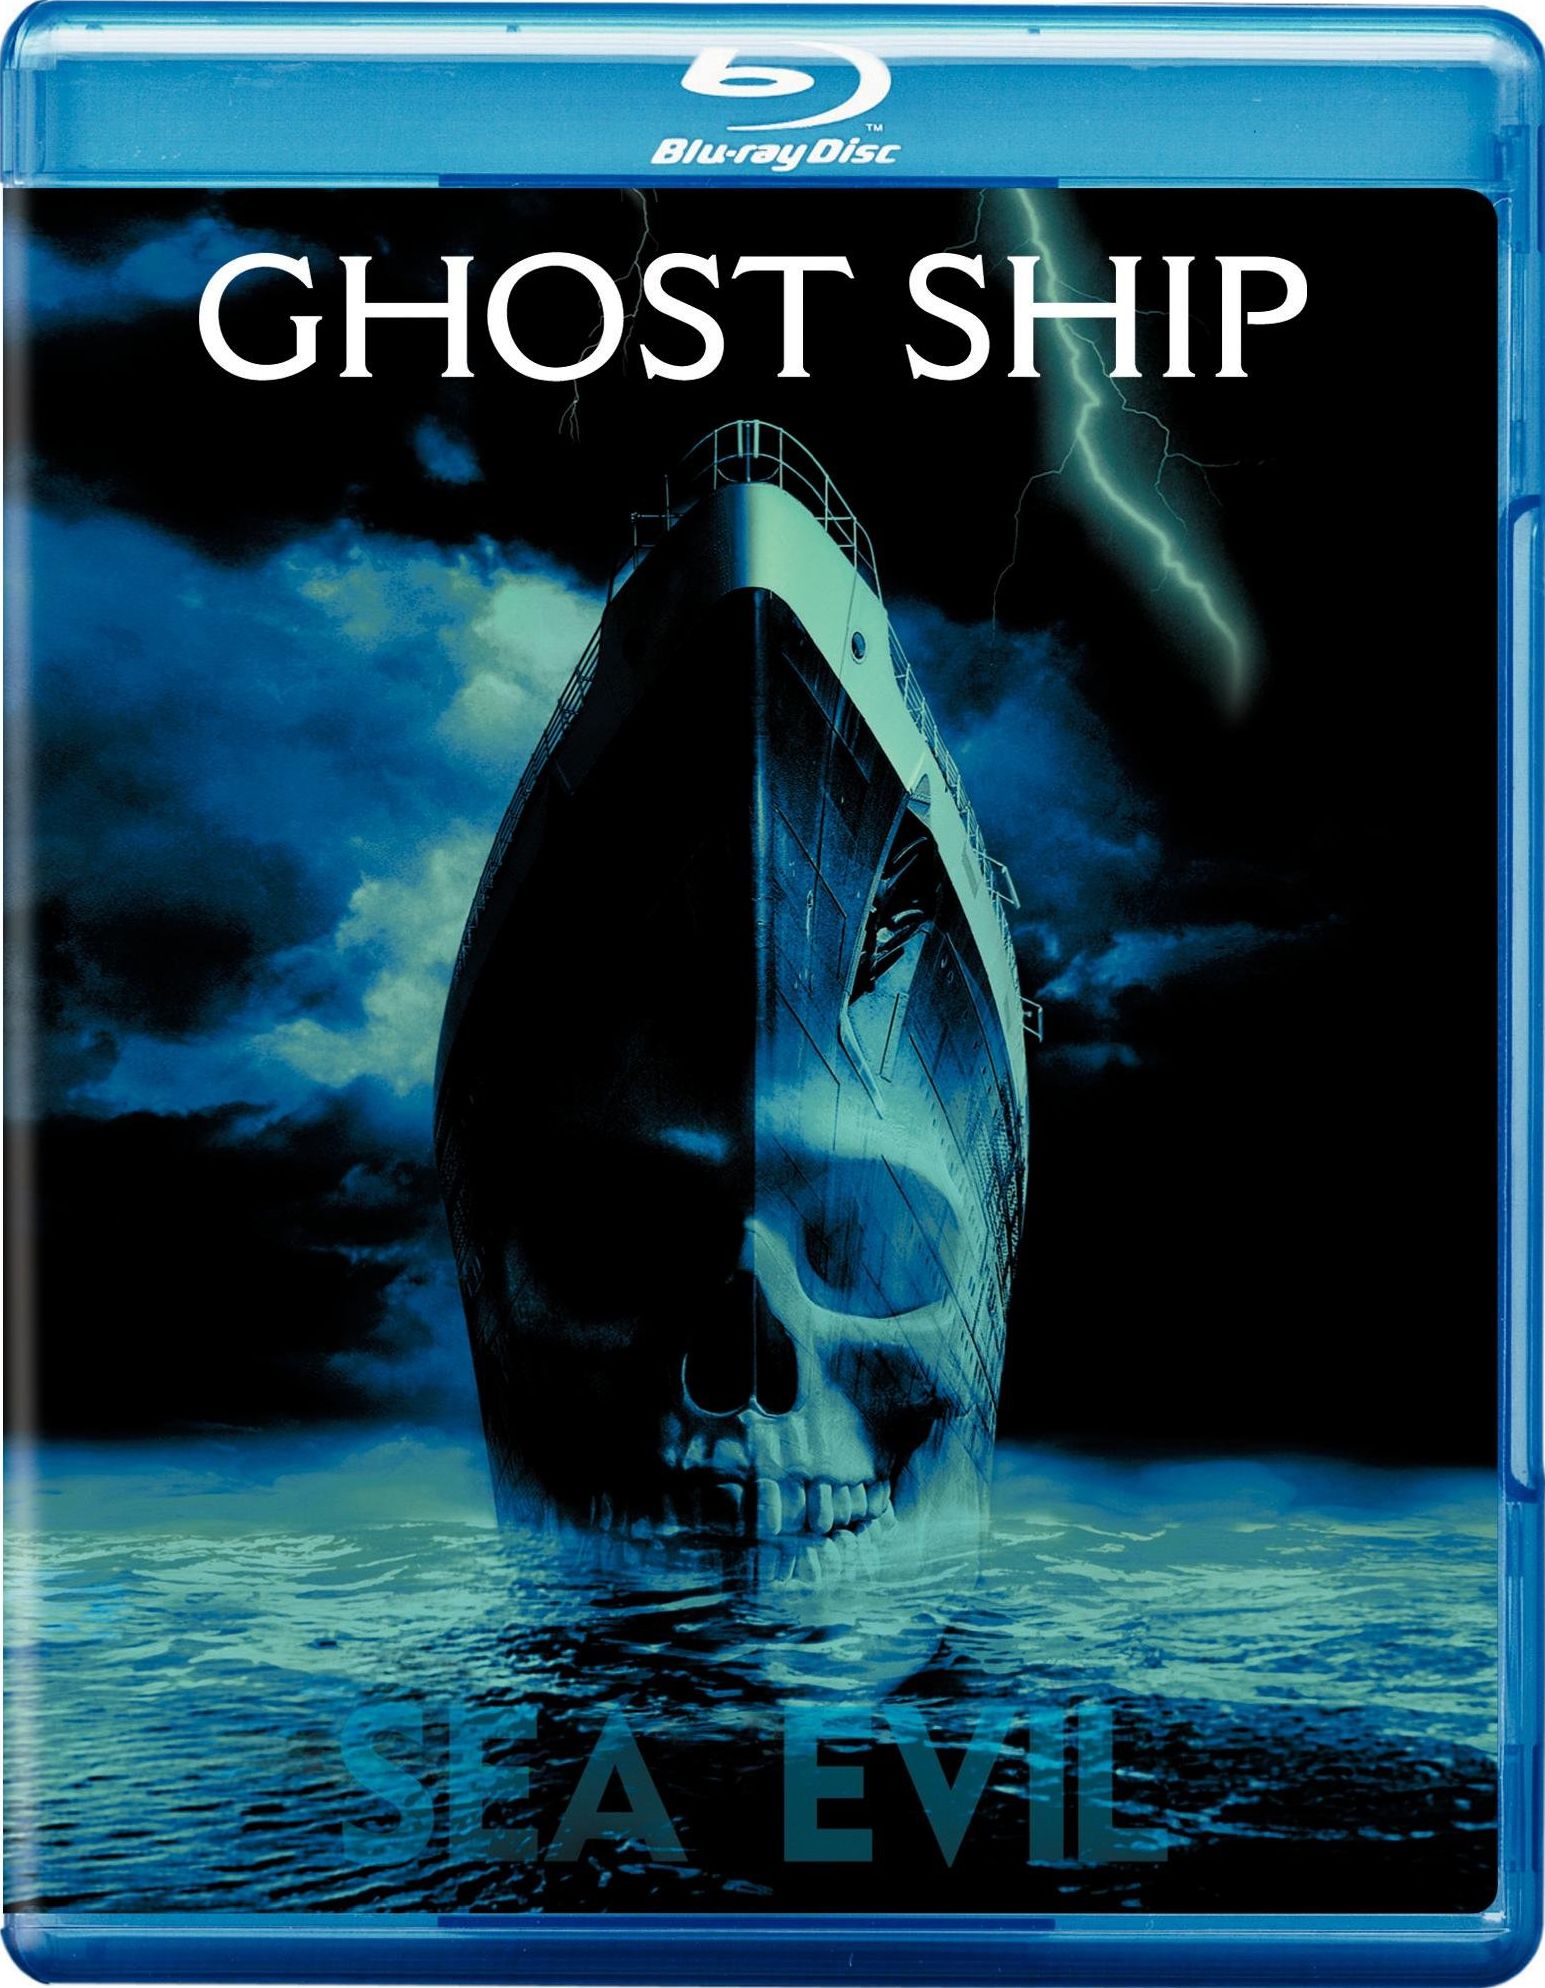 37 Best Images Ghost Ship Movie Songs / WHY I LOVE MOVIES.-Ghost Ship - 2002